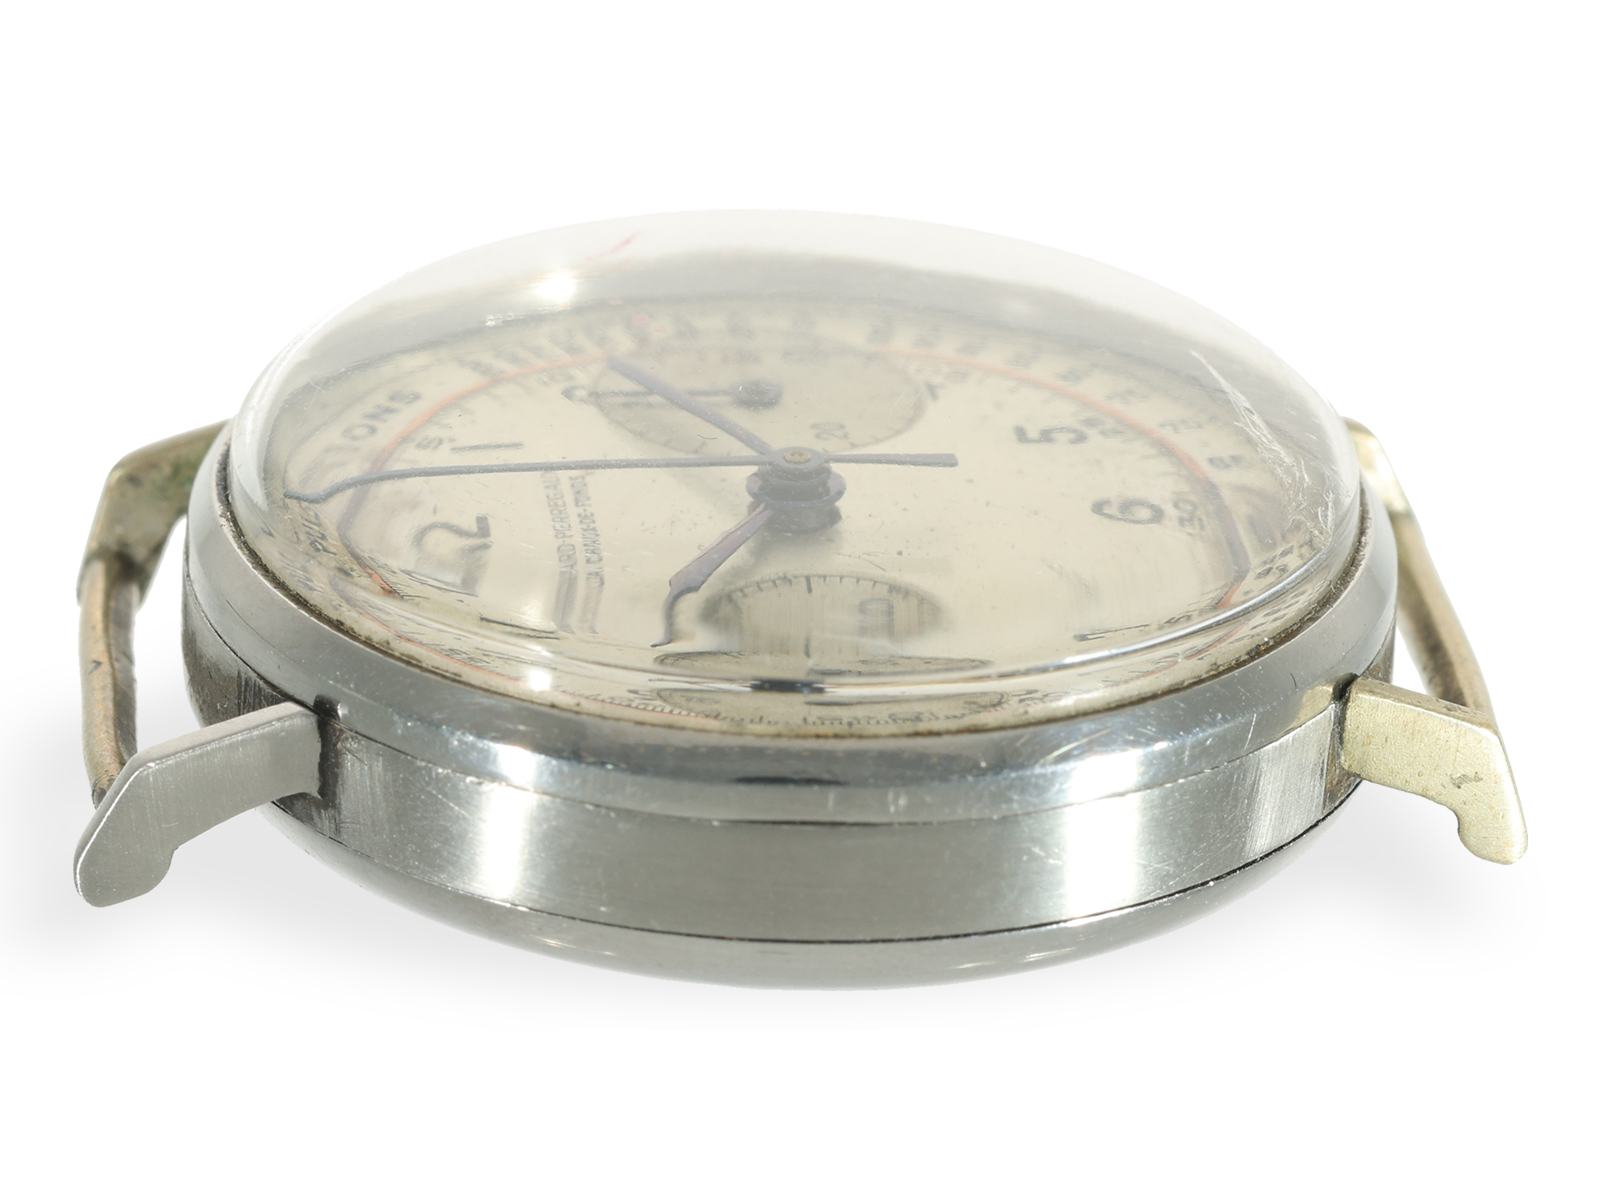 Wristwatch: rare, early Girard Perregaux chronograph with pulsometer scale, ca. 1940 - Image 2 of 5